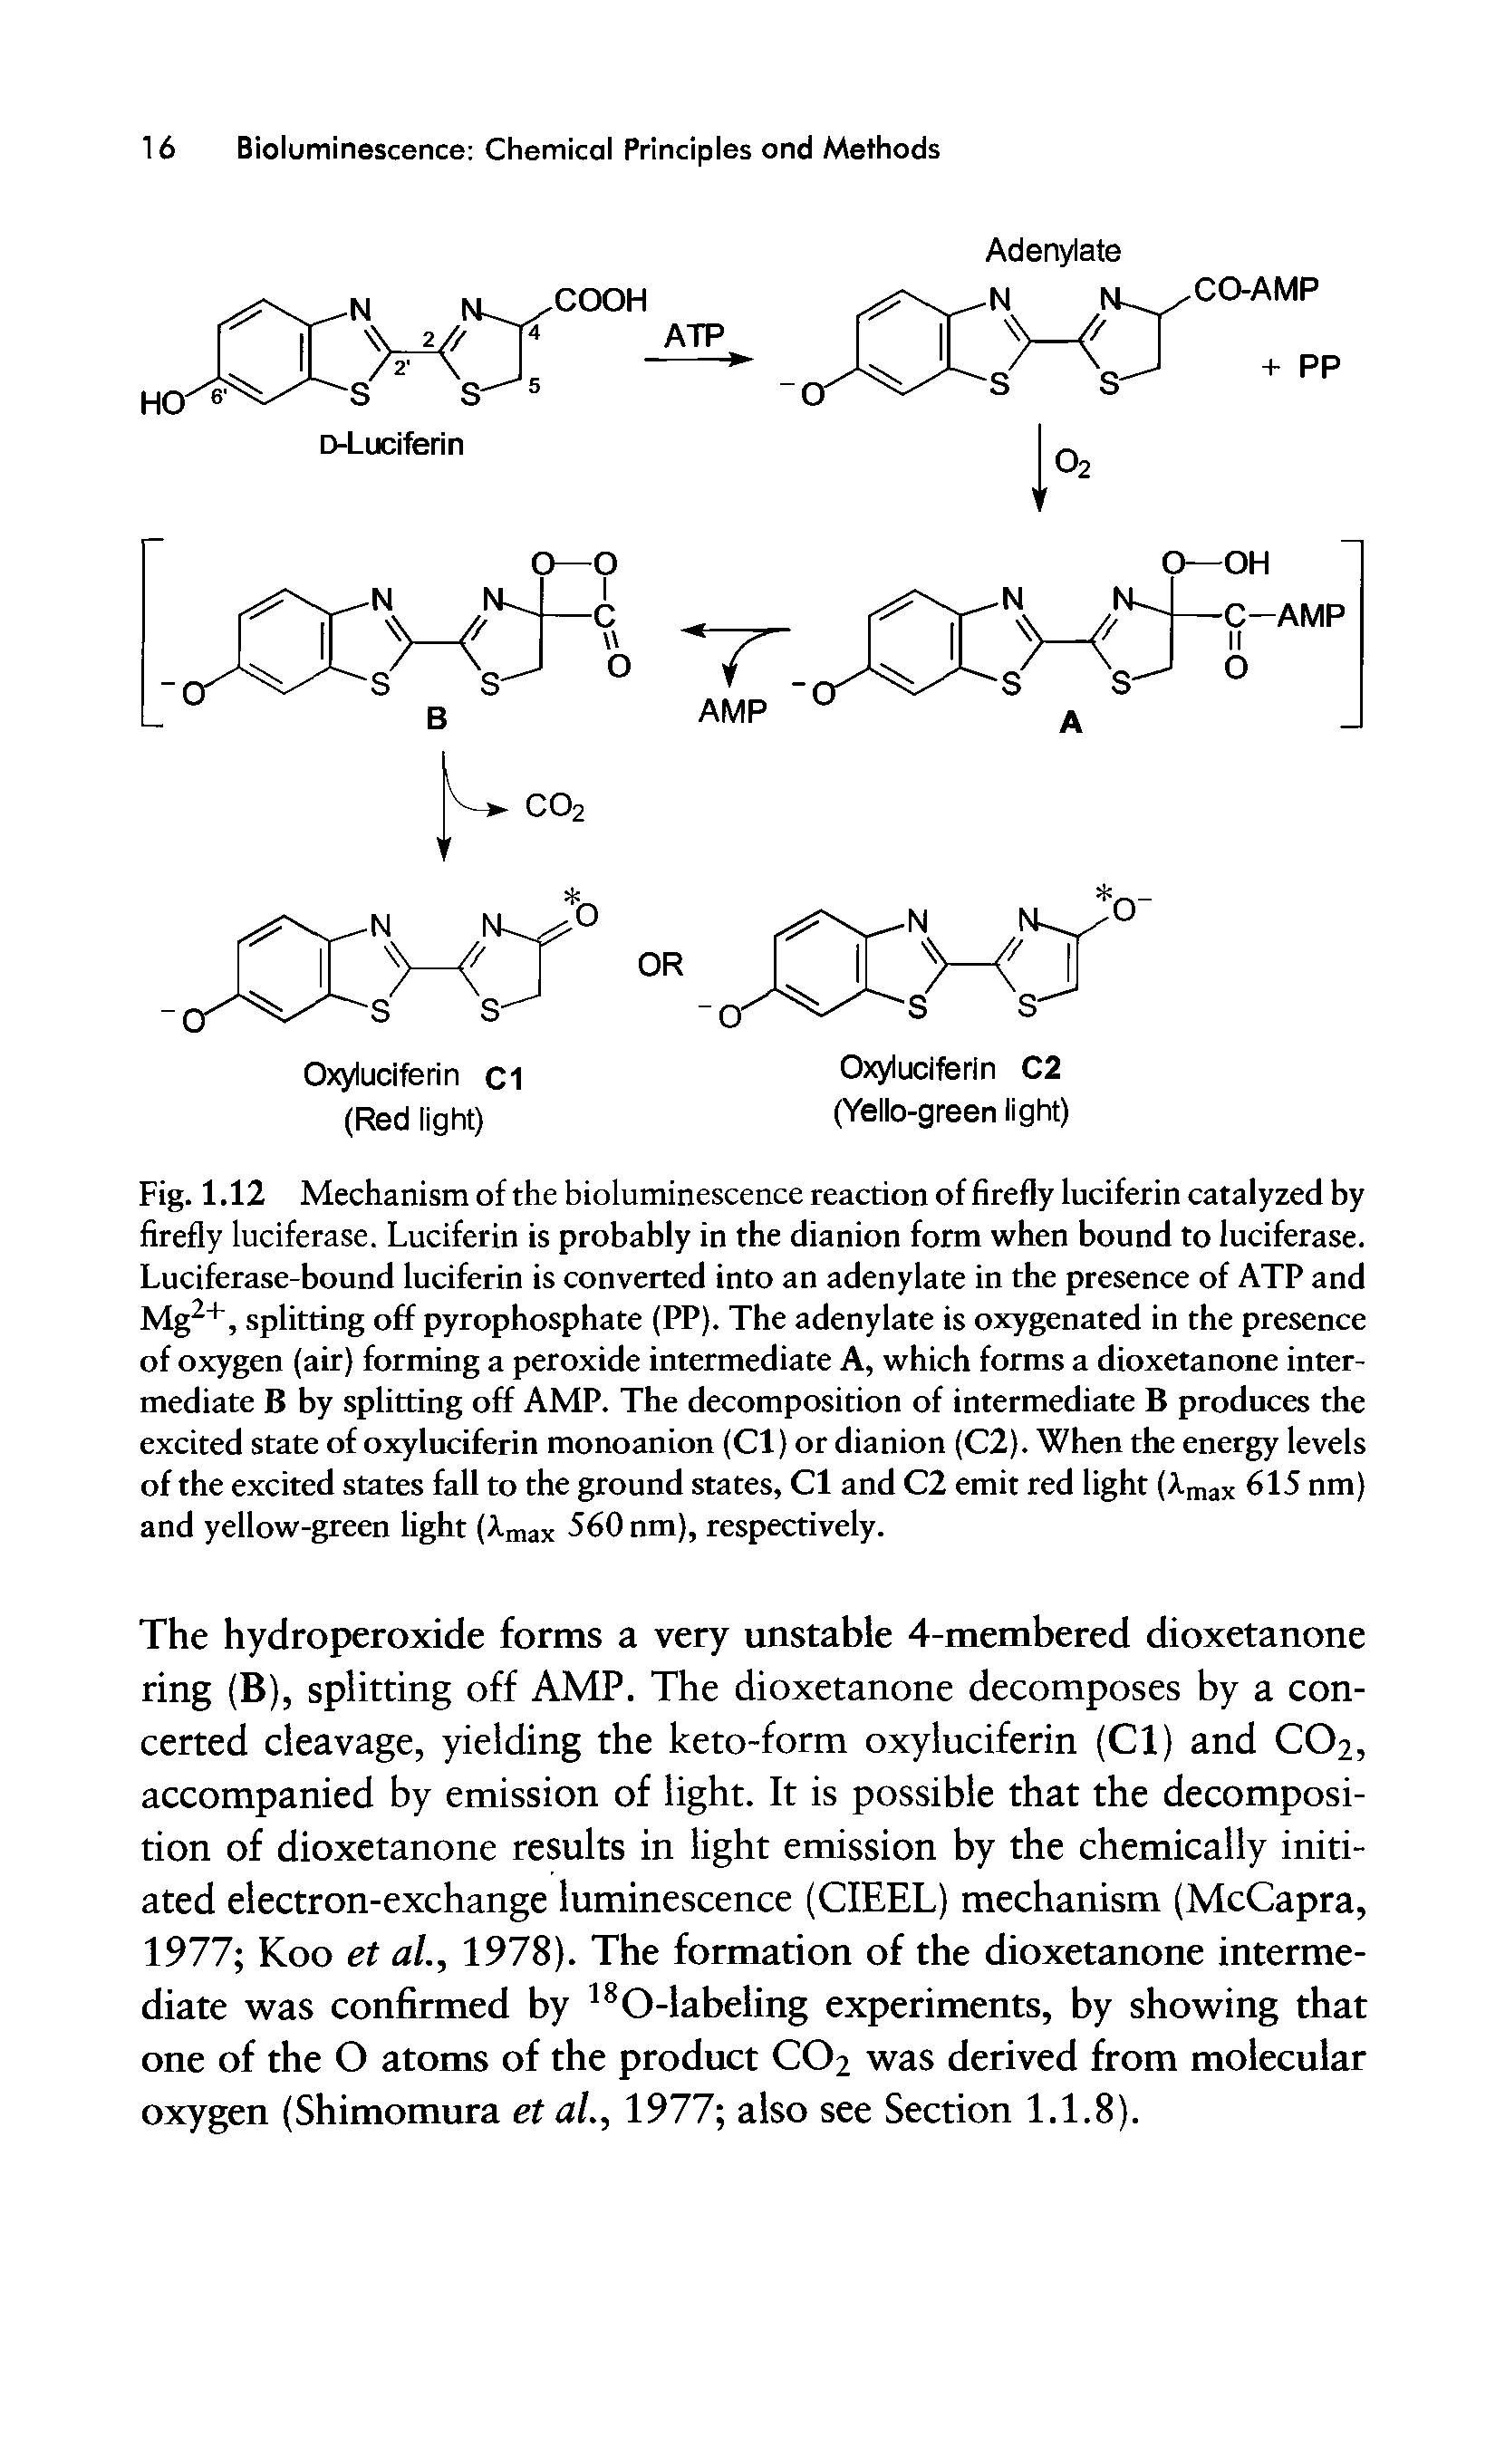 Fig. 1.12 Mechanism of the bioluminescence reaction of firefly luciferin catalyzed by firefly luciferase. Luciferin is probably in the dianion form when bound to luciferase. Luciferase-bound luciferin is converted into an adenylate in the presence of ATP and Mg2+, splitting off pyrophosphate (PP). The adenylate is oxygenated in the presence of oxygen (air) forming a peroxide intermediate A, which forms a dioxetanone intermediate B by splitting off AMP. The decomposition of intermediate B produces the excited state of oxyluciferin monoanion (Cl) or dianion (C2). When the energy levels of the excited states fall to the ground states, Cl and C2 emit red light (Amax 615 nm) and yellow-green light (Amax 560 nm), respectively.